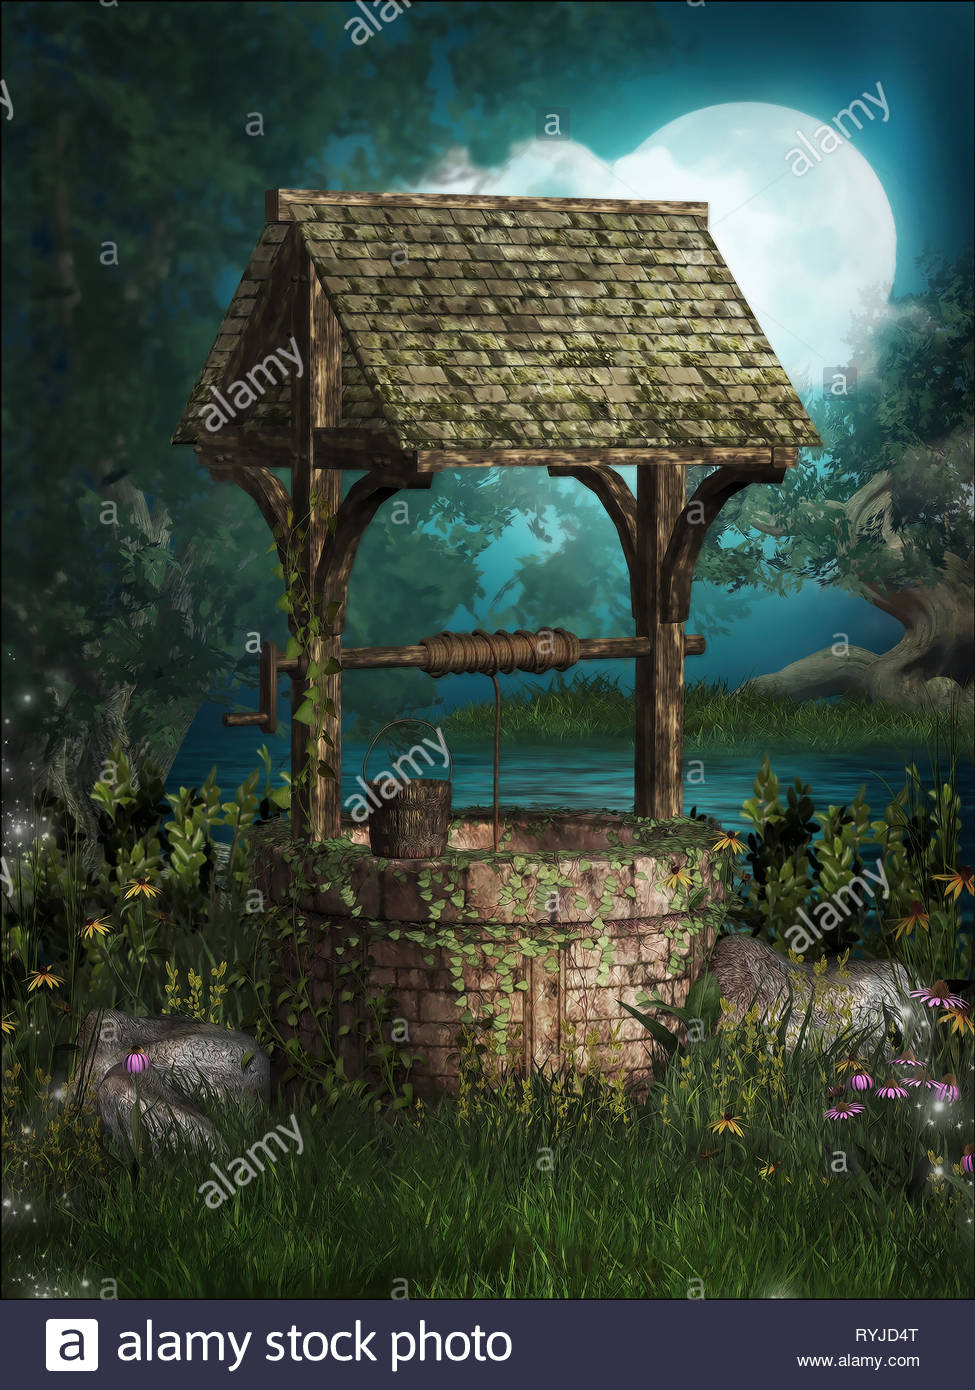 3d illustration fantasy graphic background of a well at night near